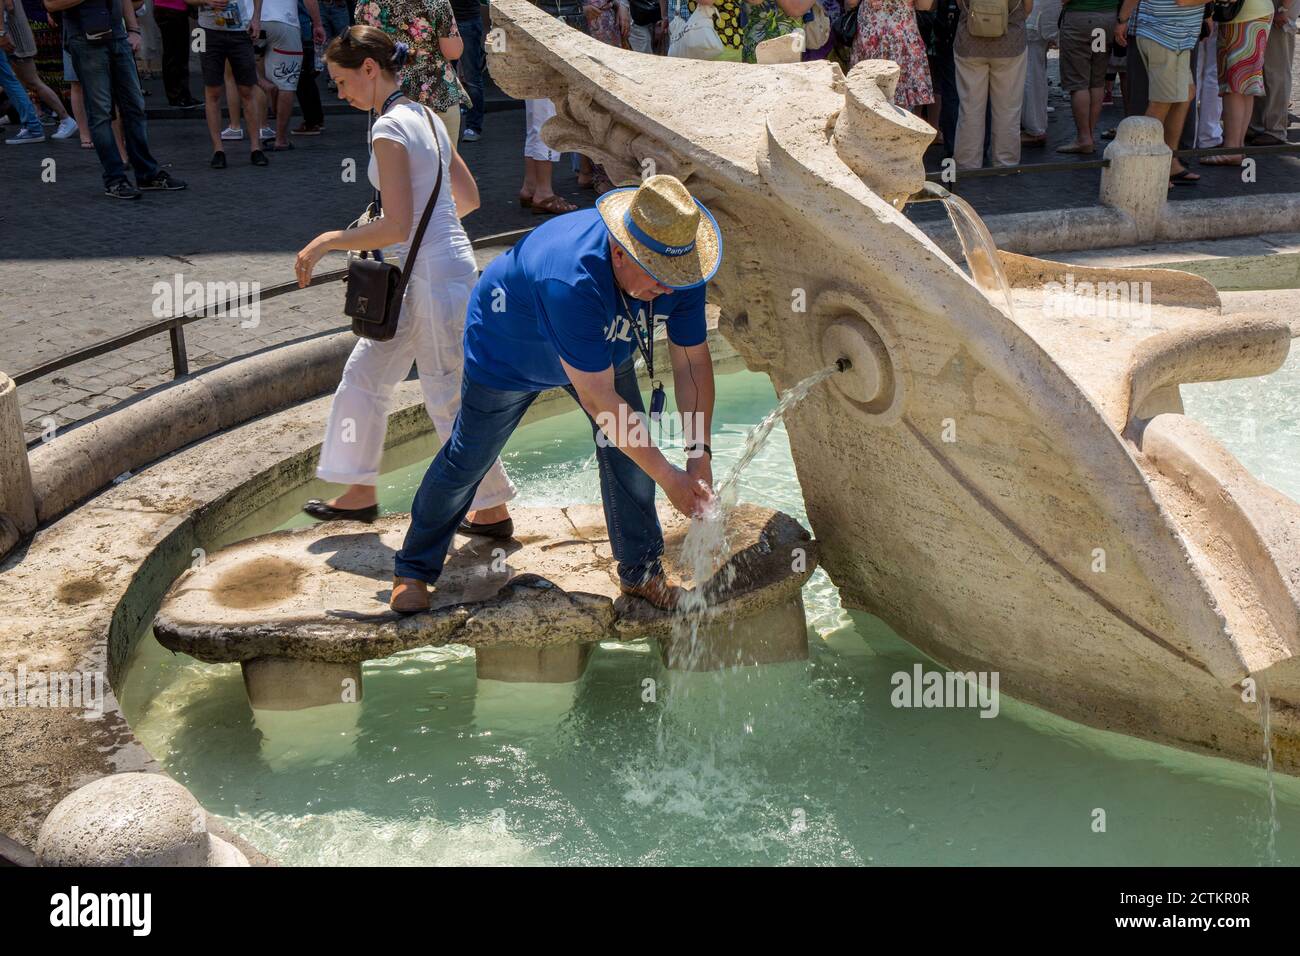 Rome, Lazio region, Italy.  Man filling a water bottle at the Fontana della Barcaccia (which can be translated as “Fountain of the Worthless Boat” or Stock Photo